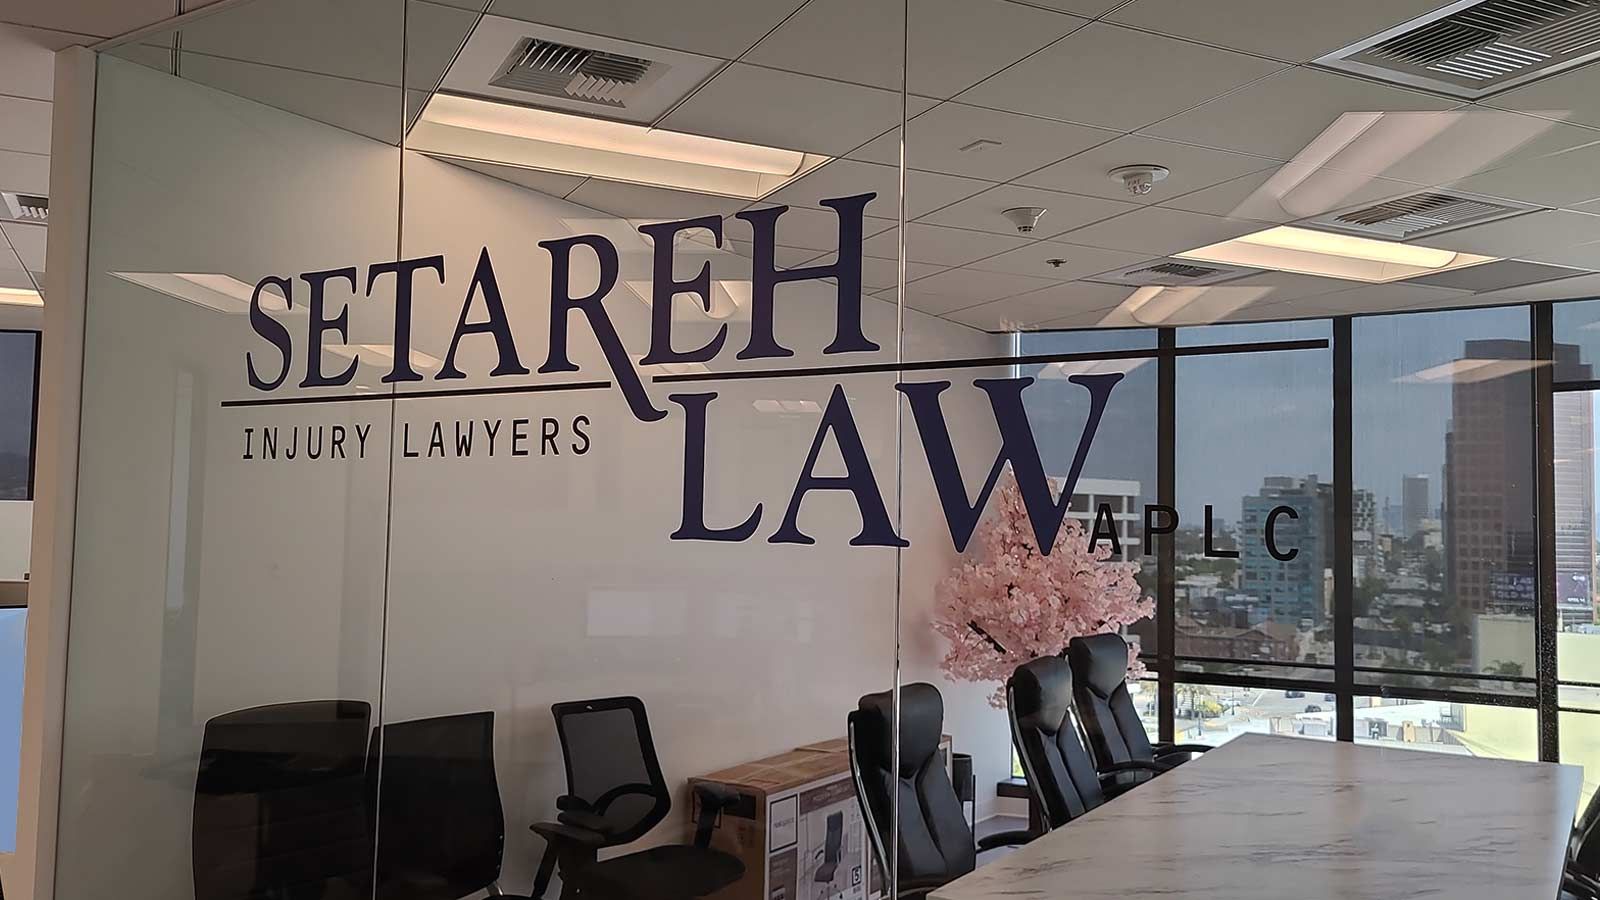 Setareh Law, APLC vinyl lettering applied to the glass